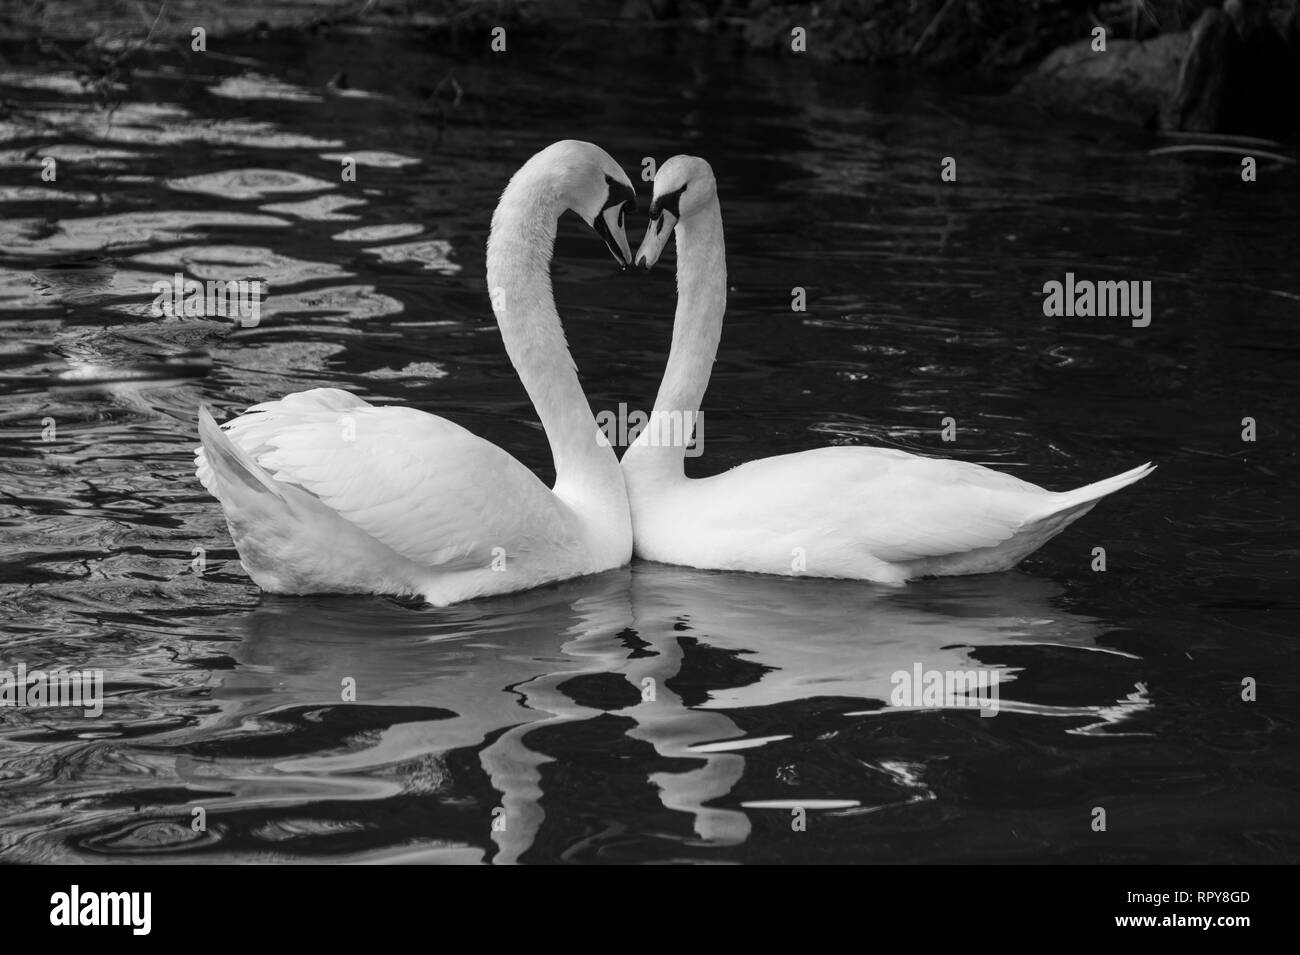 pair of beautiful white swans with elegant necks forming a heart shape in black and white Stock Photo